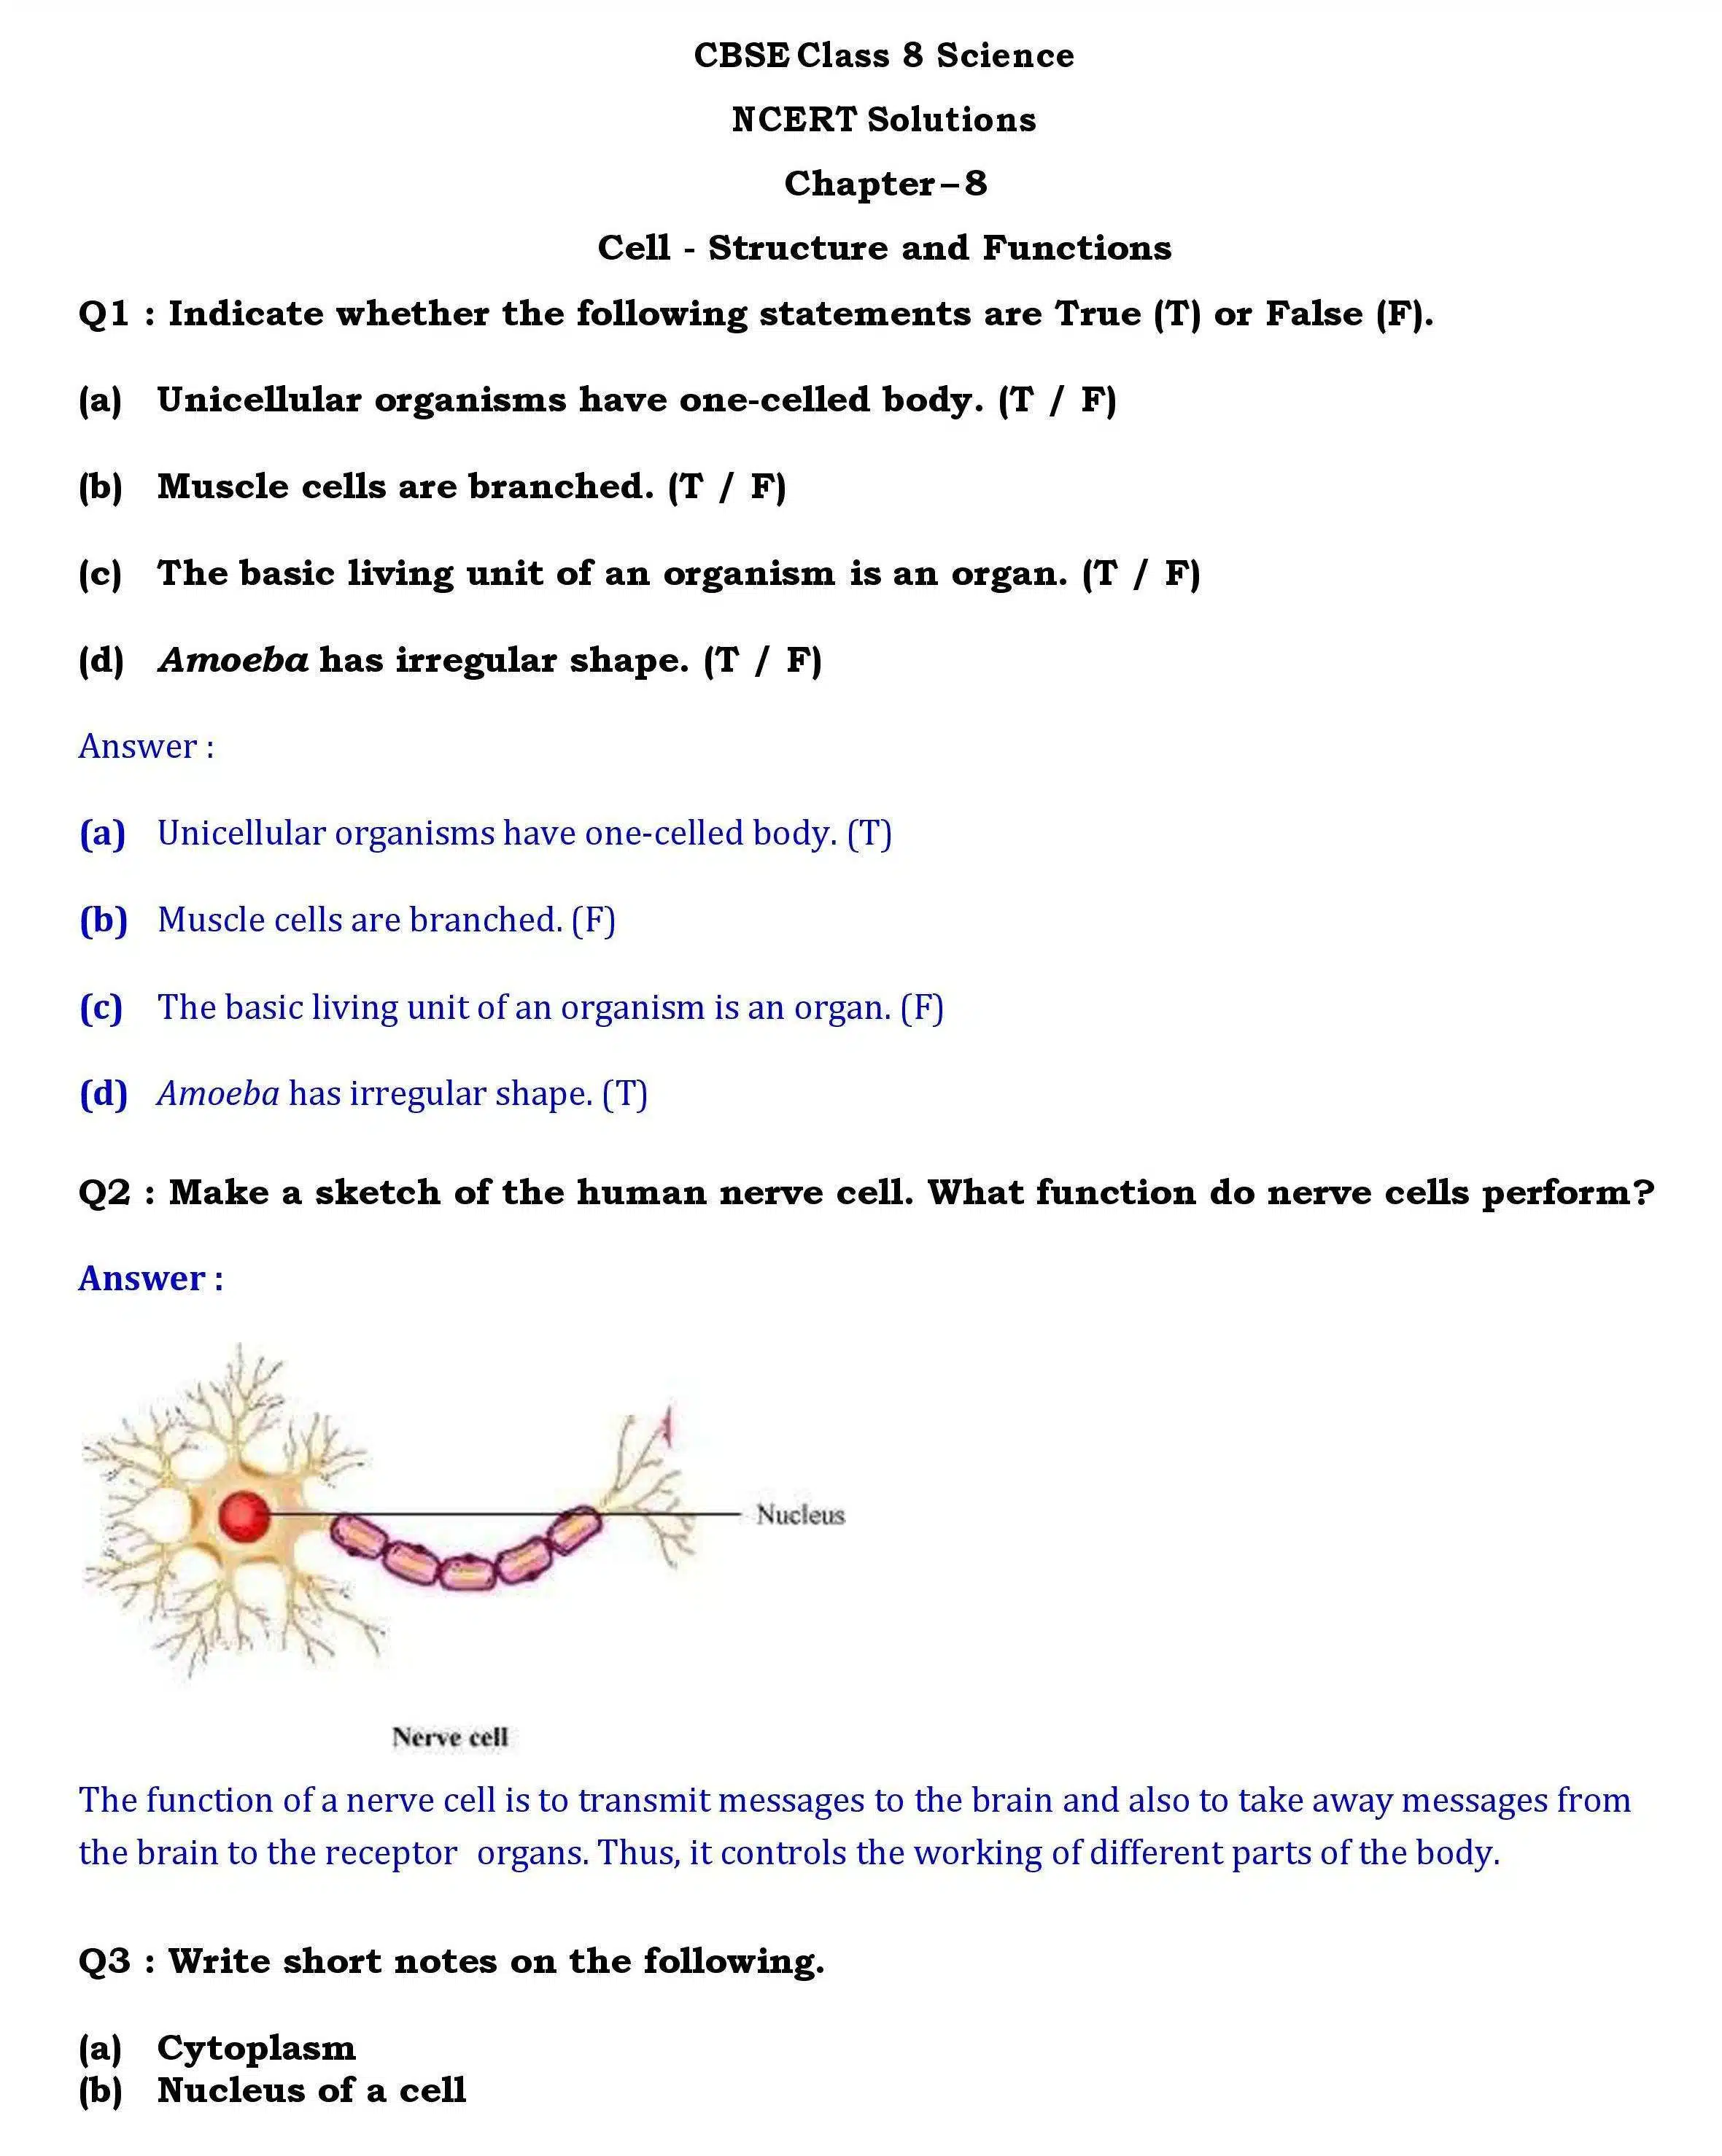 NCERT Solutions for Class 8 Science Chapter 8 page 001